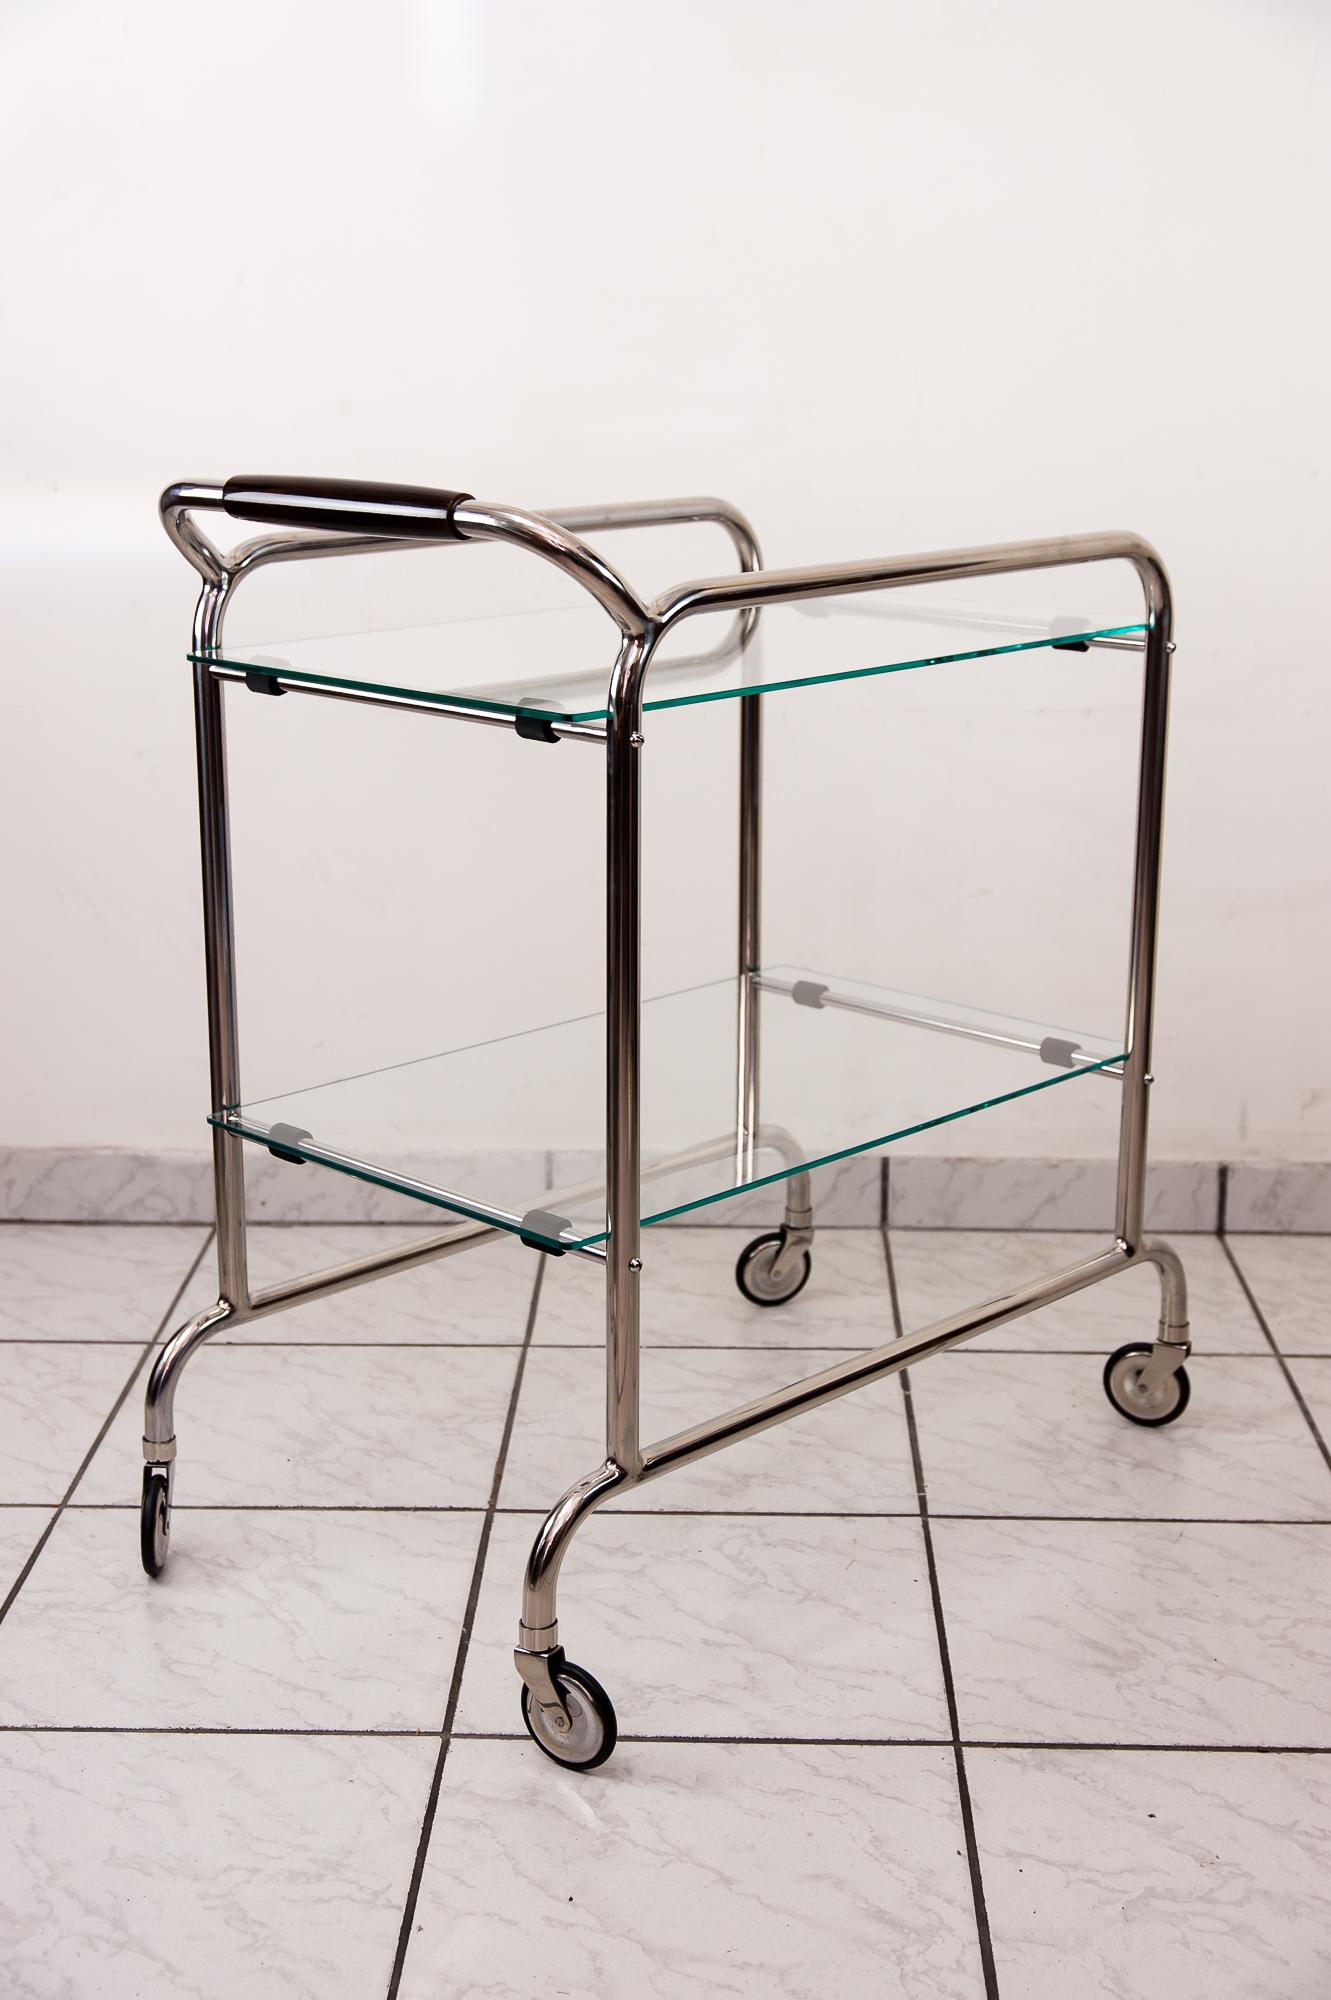 Early 20th Century Art Deco Serving Cart 1920s Attributed to Thonet